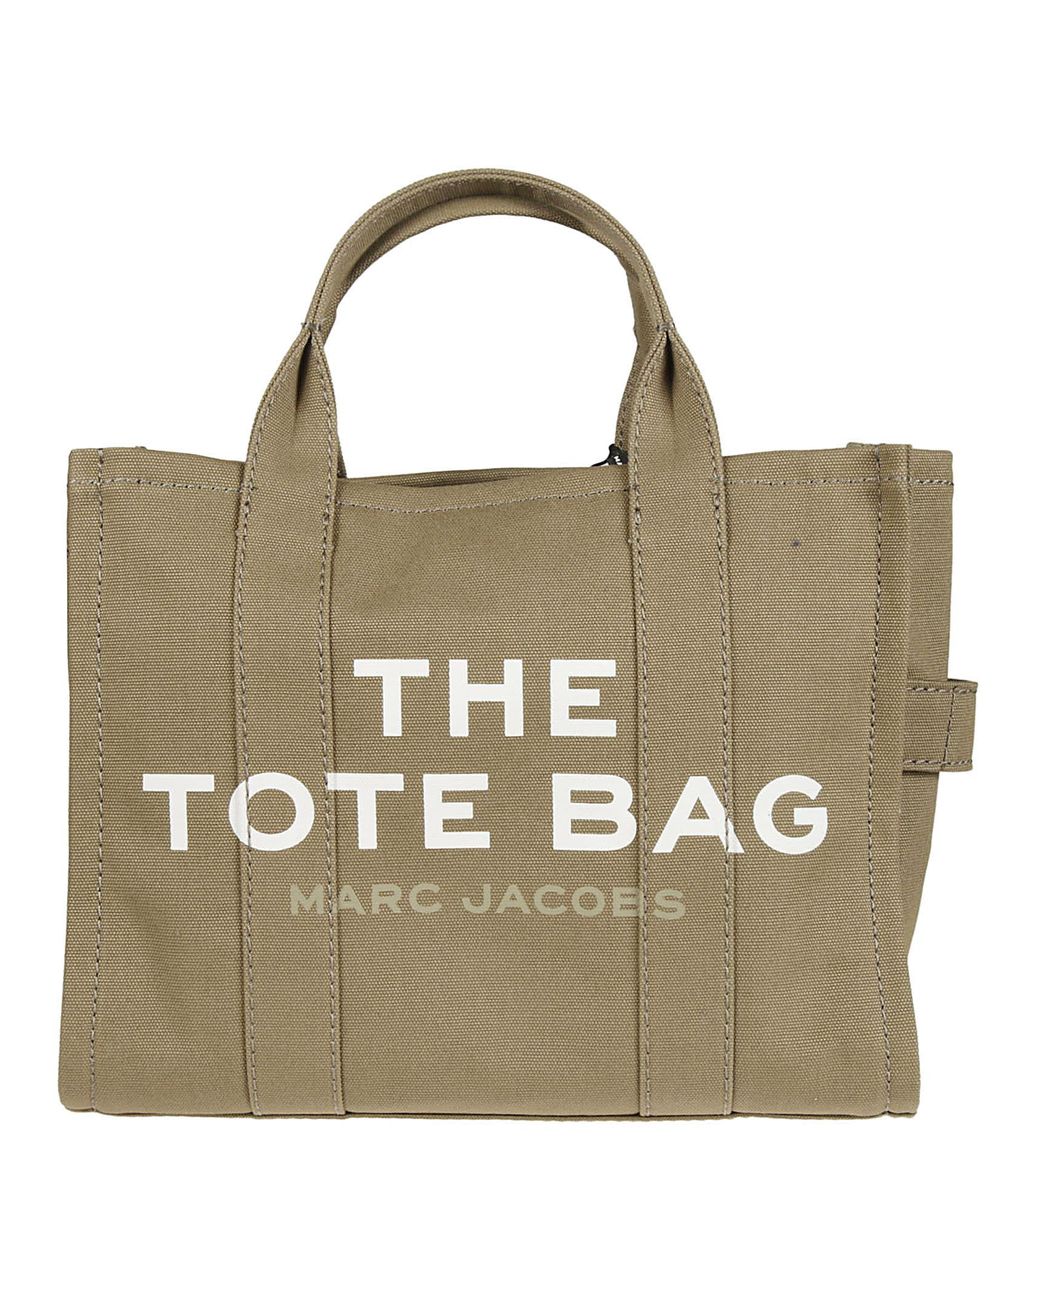 Marc Jacobs The Tote Bag Tote in Slate Green (Green) | Lyst UK